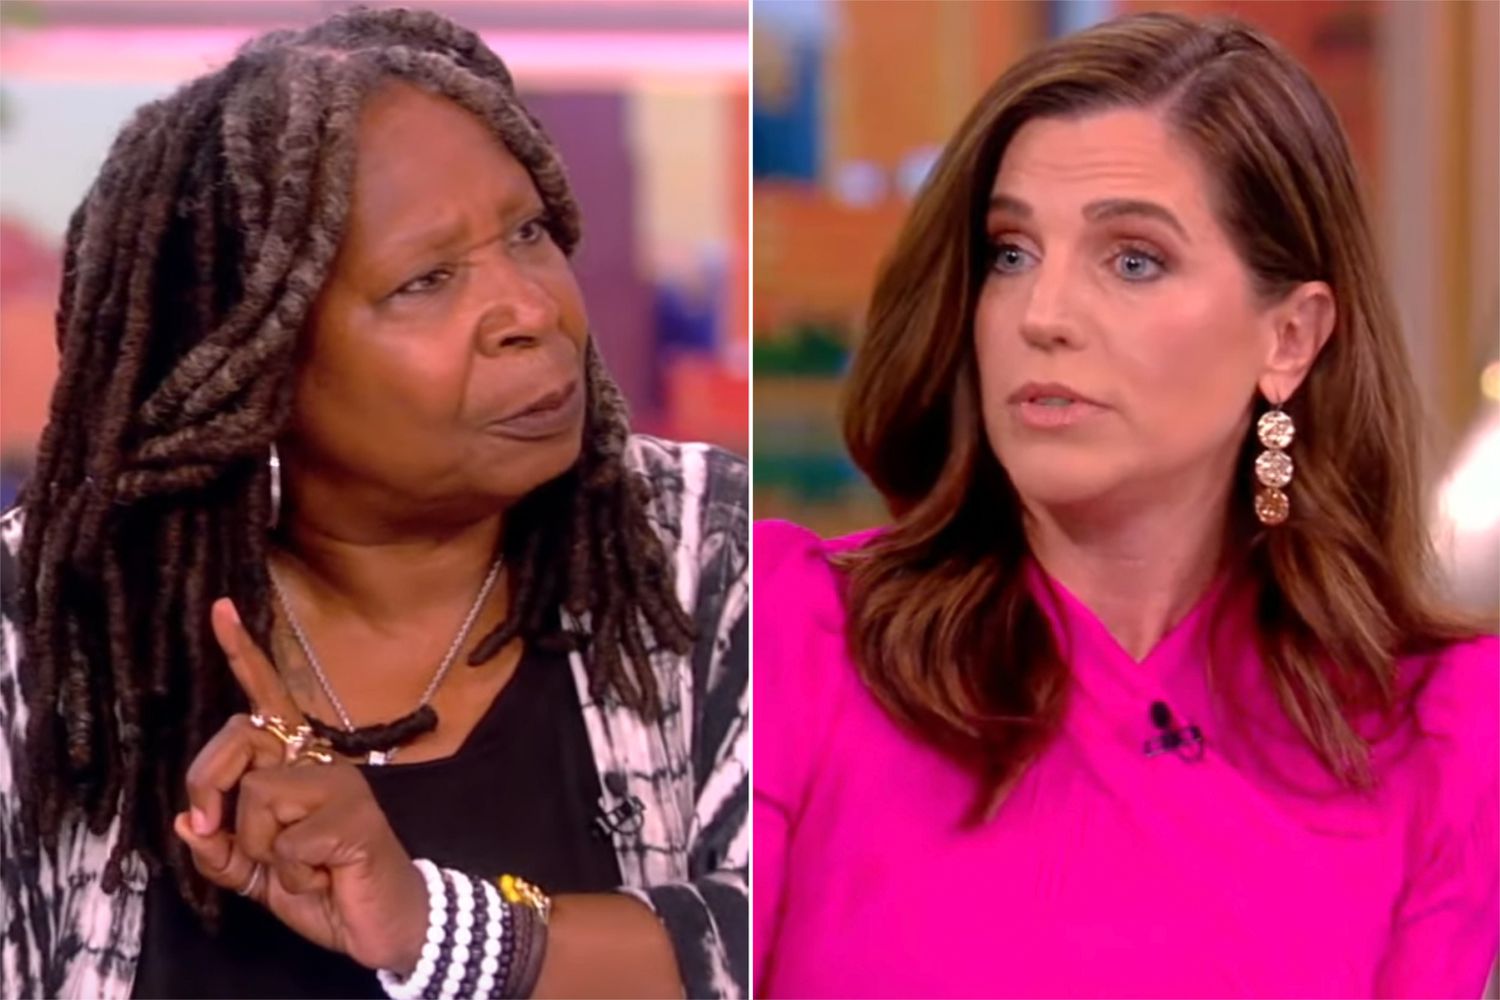 Whoopi Goldberg has tense clash with congresswoman over abortion on The View: 'Why isn't it my choice?'